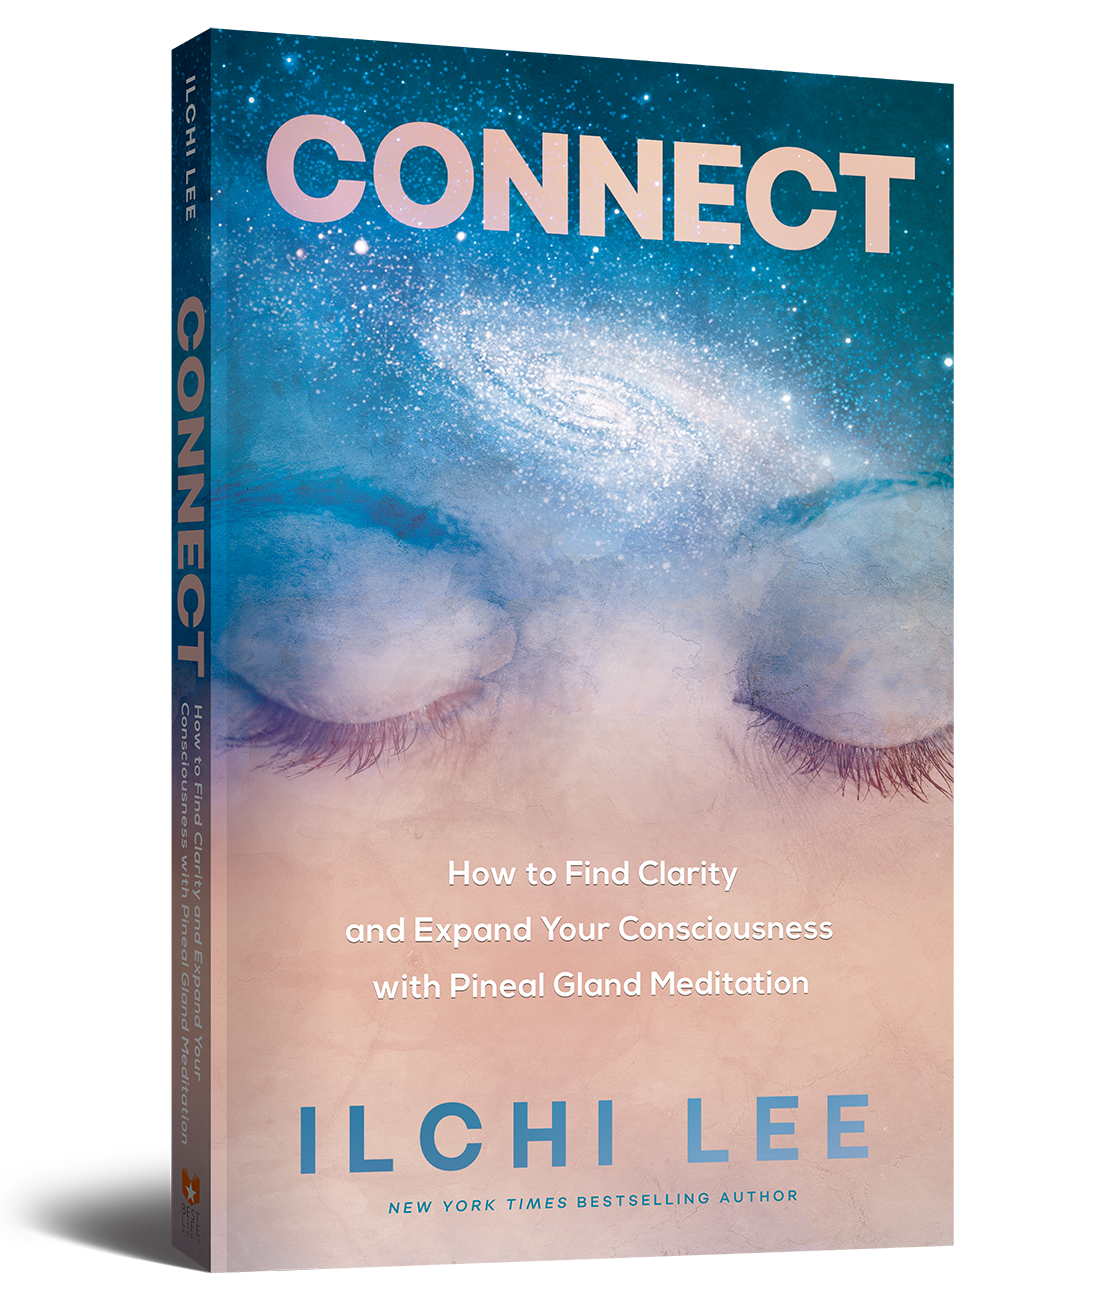 CONNECT: How to Find Clarity and Expand Your Consciousness with Pineal Gland Meditation